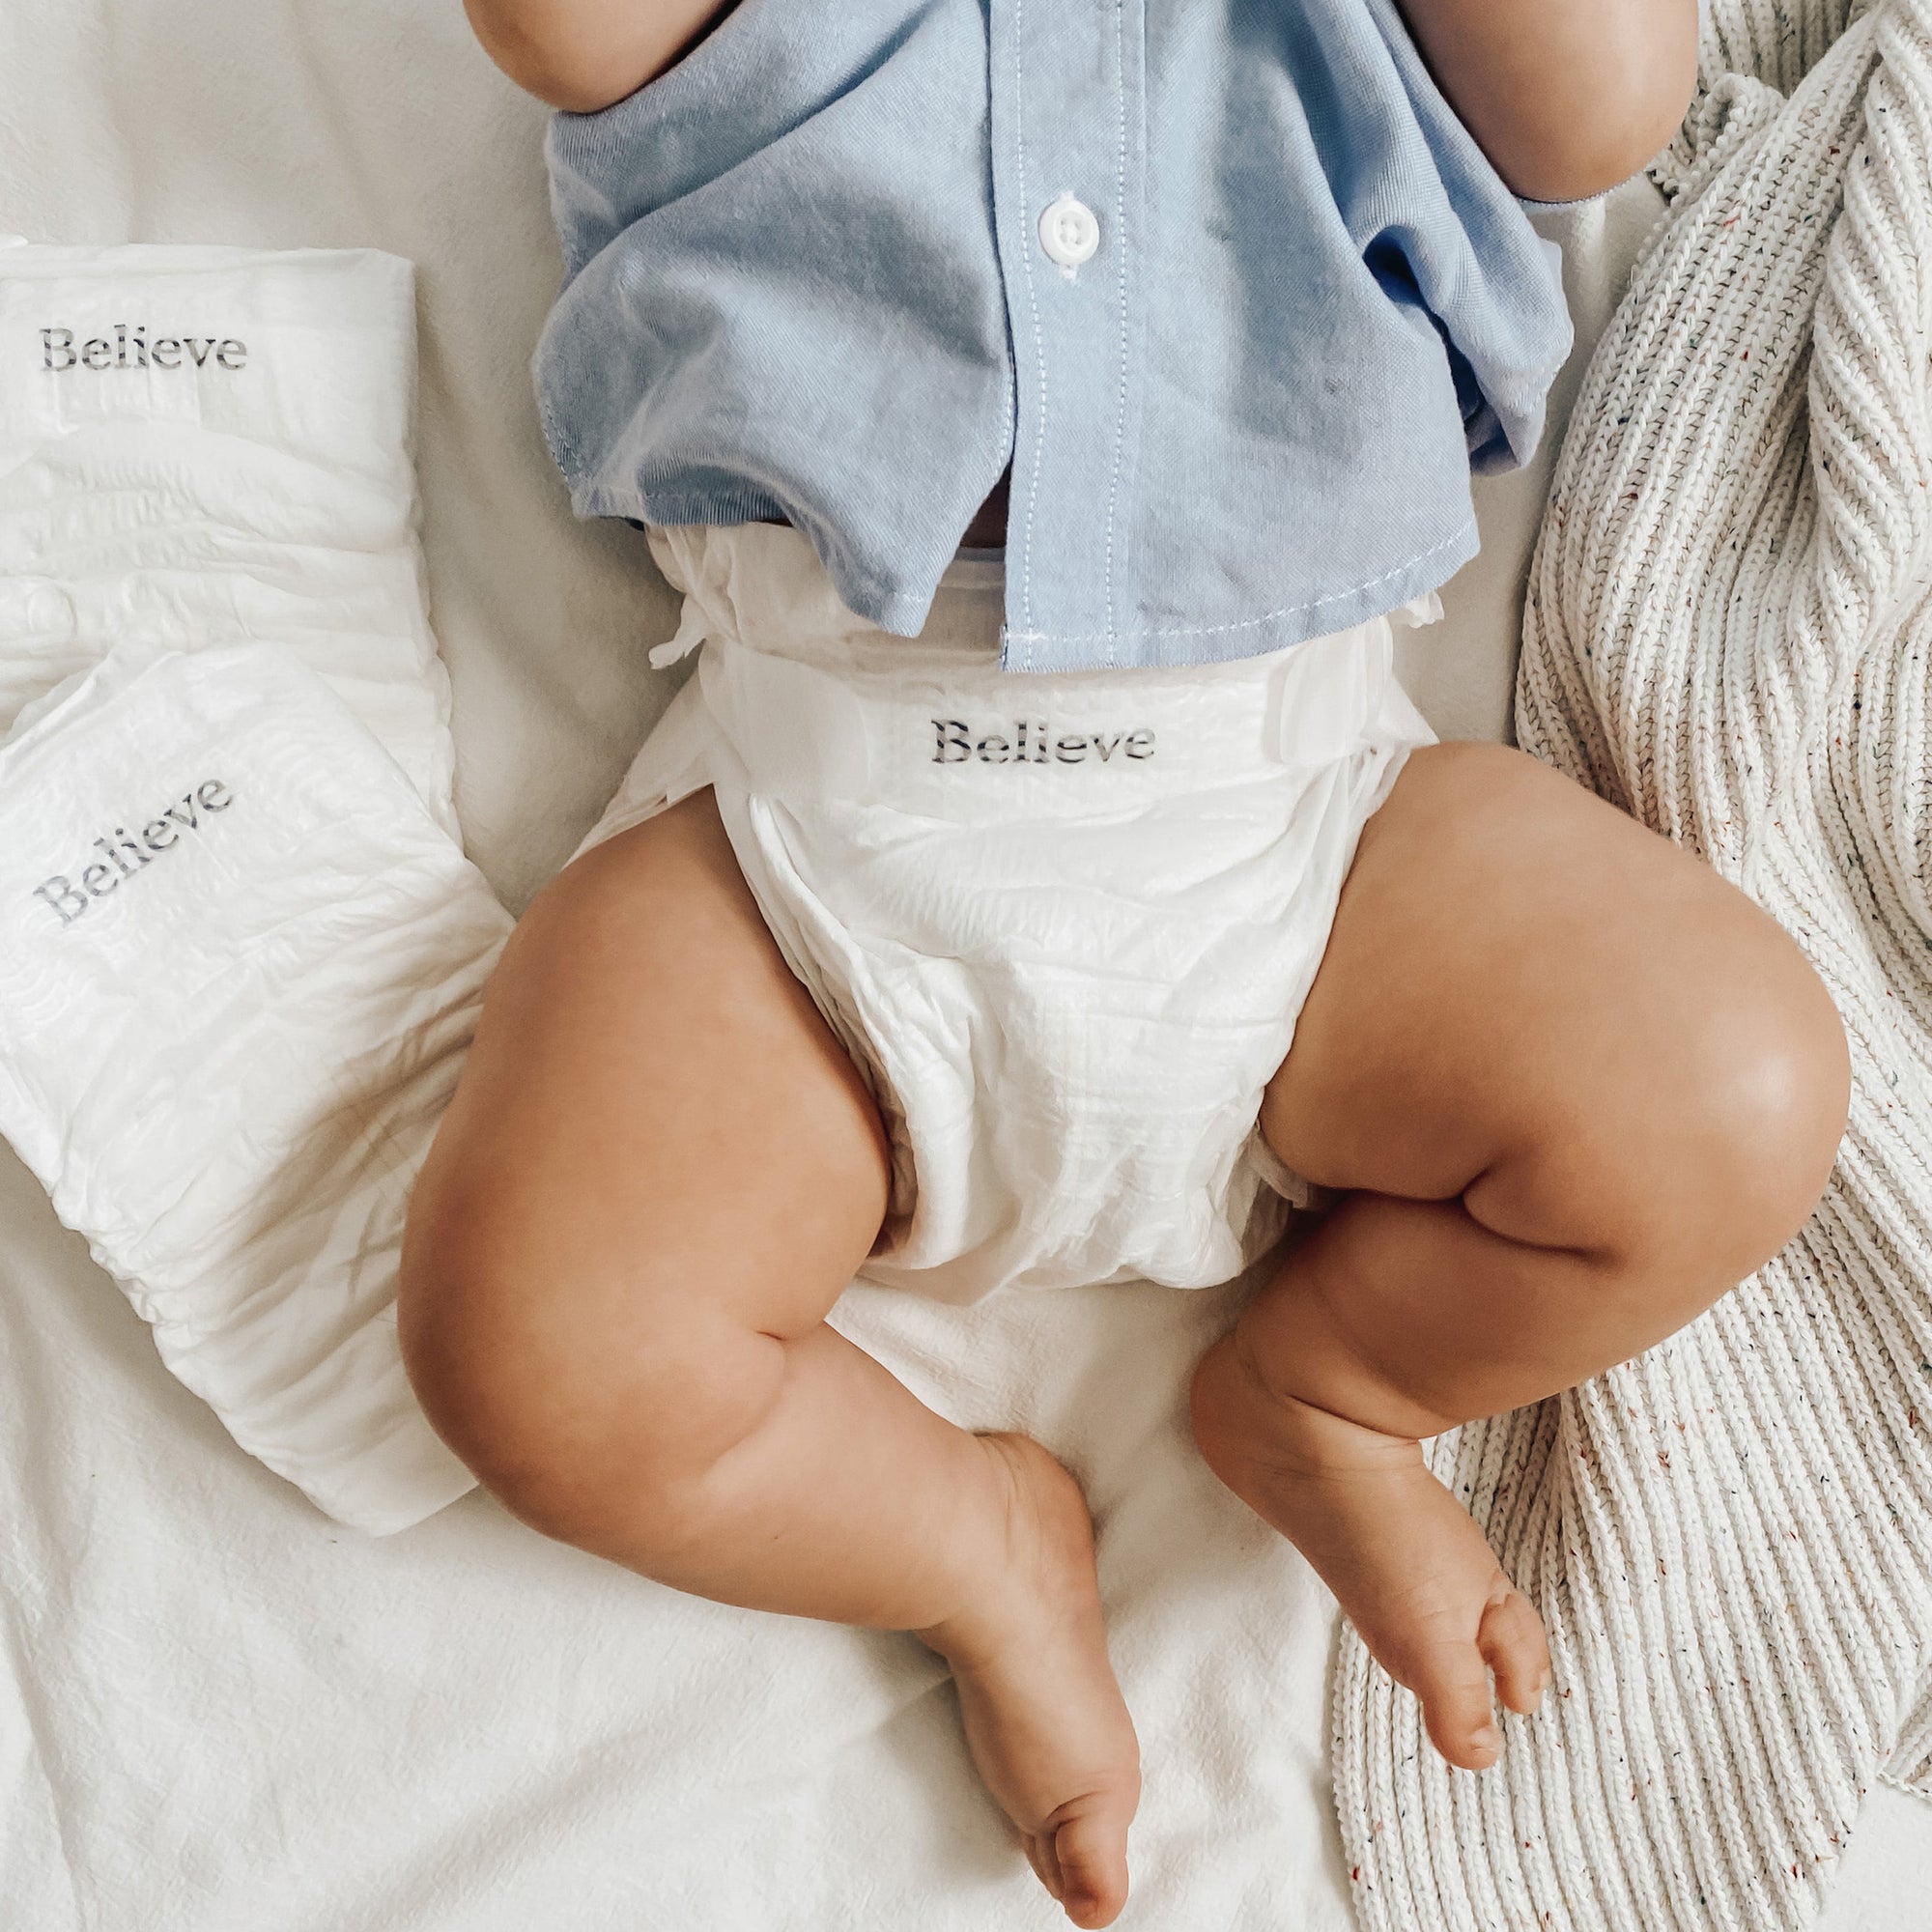 Believe Diapers is Celebrating Their 1-Year Anniversary